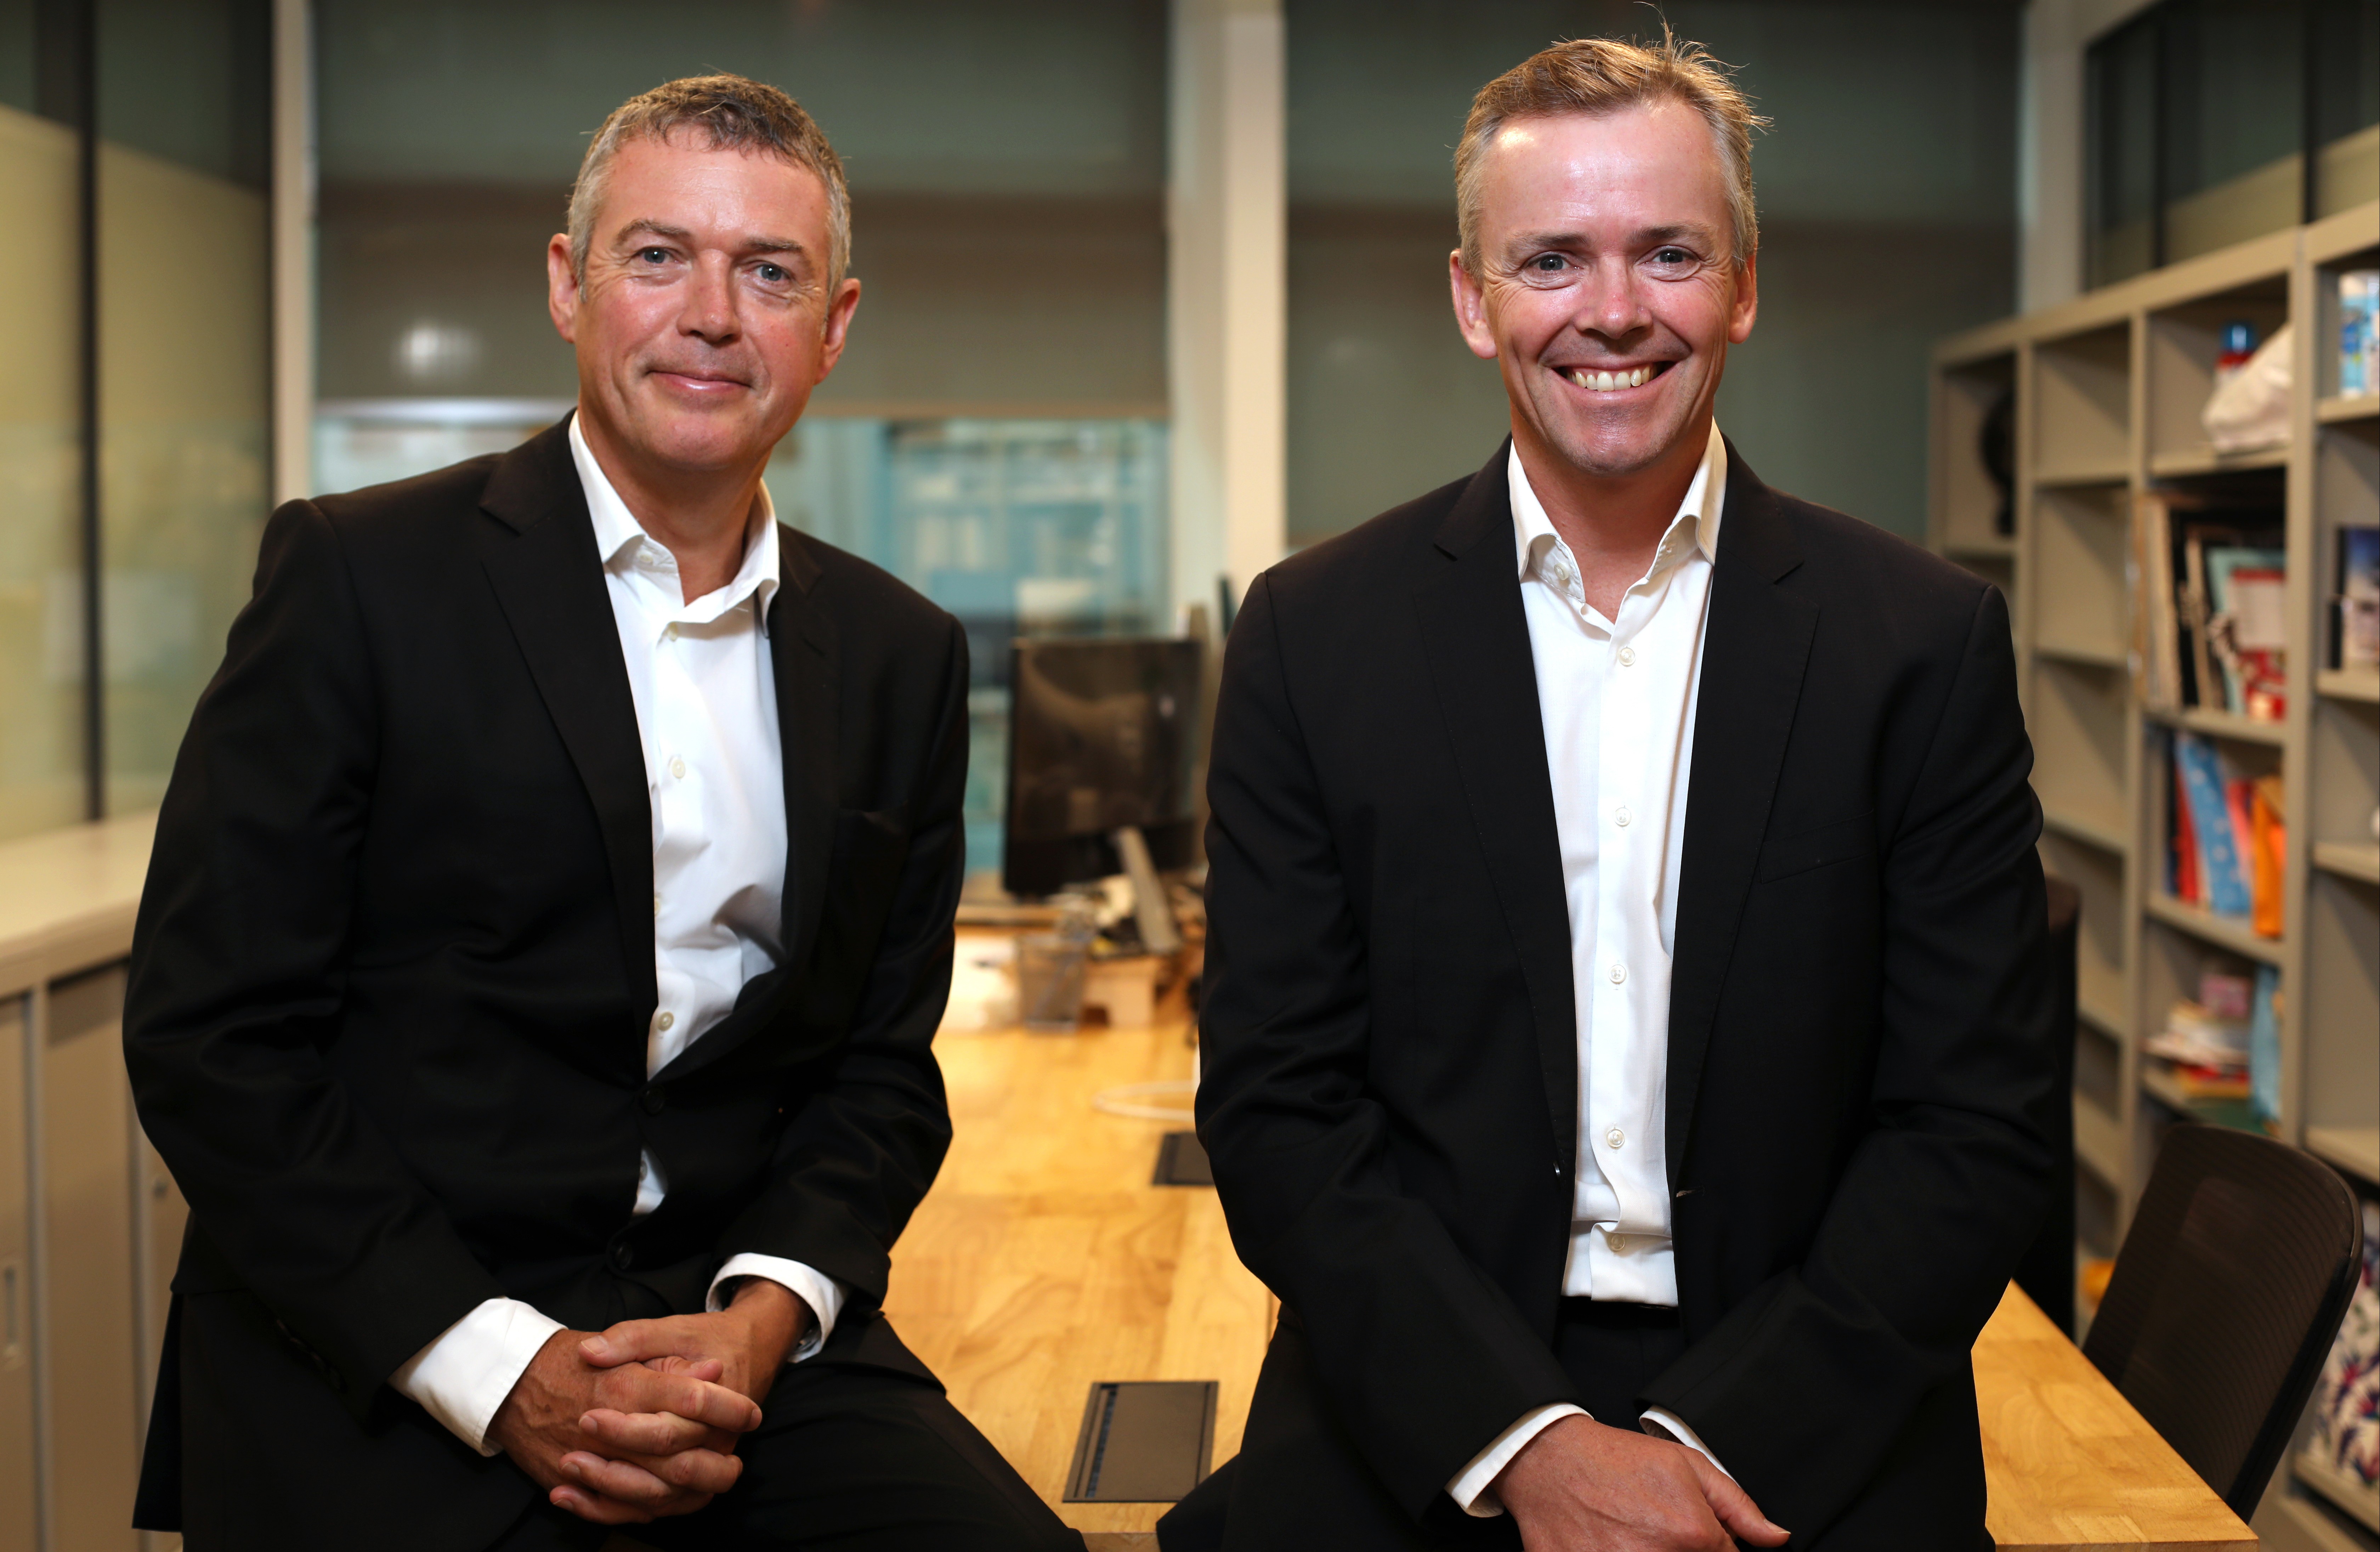 M&C Saatchi chief executive officer worldwide Moray MacLennan (left), and Richard Morewood, chief executive officer for Asia, are re-establishing a presence in Hong Kong for the global branding powerhouse. Photo: Xiaomei Chen